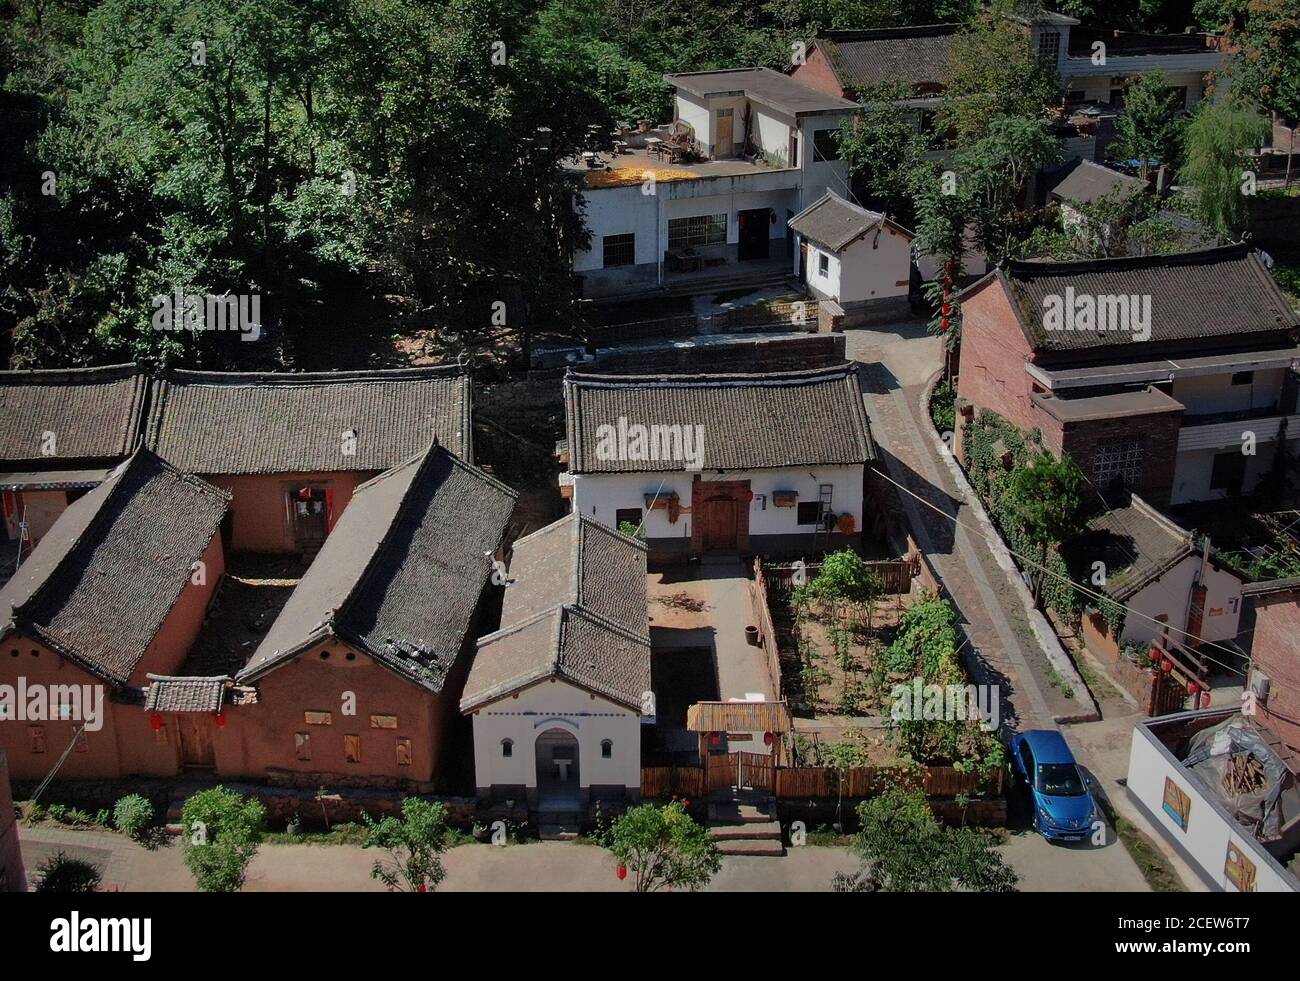 (200902) -- SONGXIAN, Sept. 2, 2020 (Xinhua) -- Aerial photo taken on Sept. 2, 2020 shows some renovated houses in Dawanggou Village in Deting Town of Songxian County, Luoyang City, central China's Henan Province. Dawanggou Village, located in a mountainous area, used to be an impoverished village. In recent years, the local government has made efforts in improving the living conditions of the villagers, carrying out relocation and renovation work. By improving the appearance of the village, rural tourism has been developed, which helps people here get rid of poverty without working far away f Stock Photo